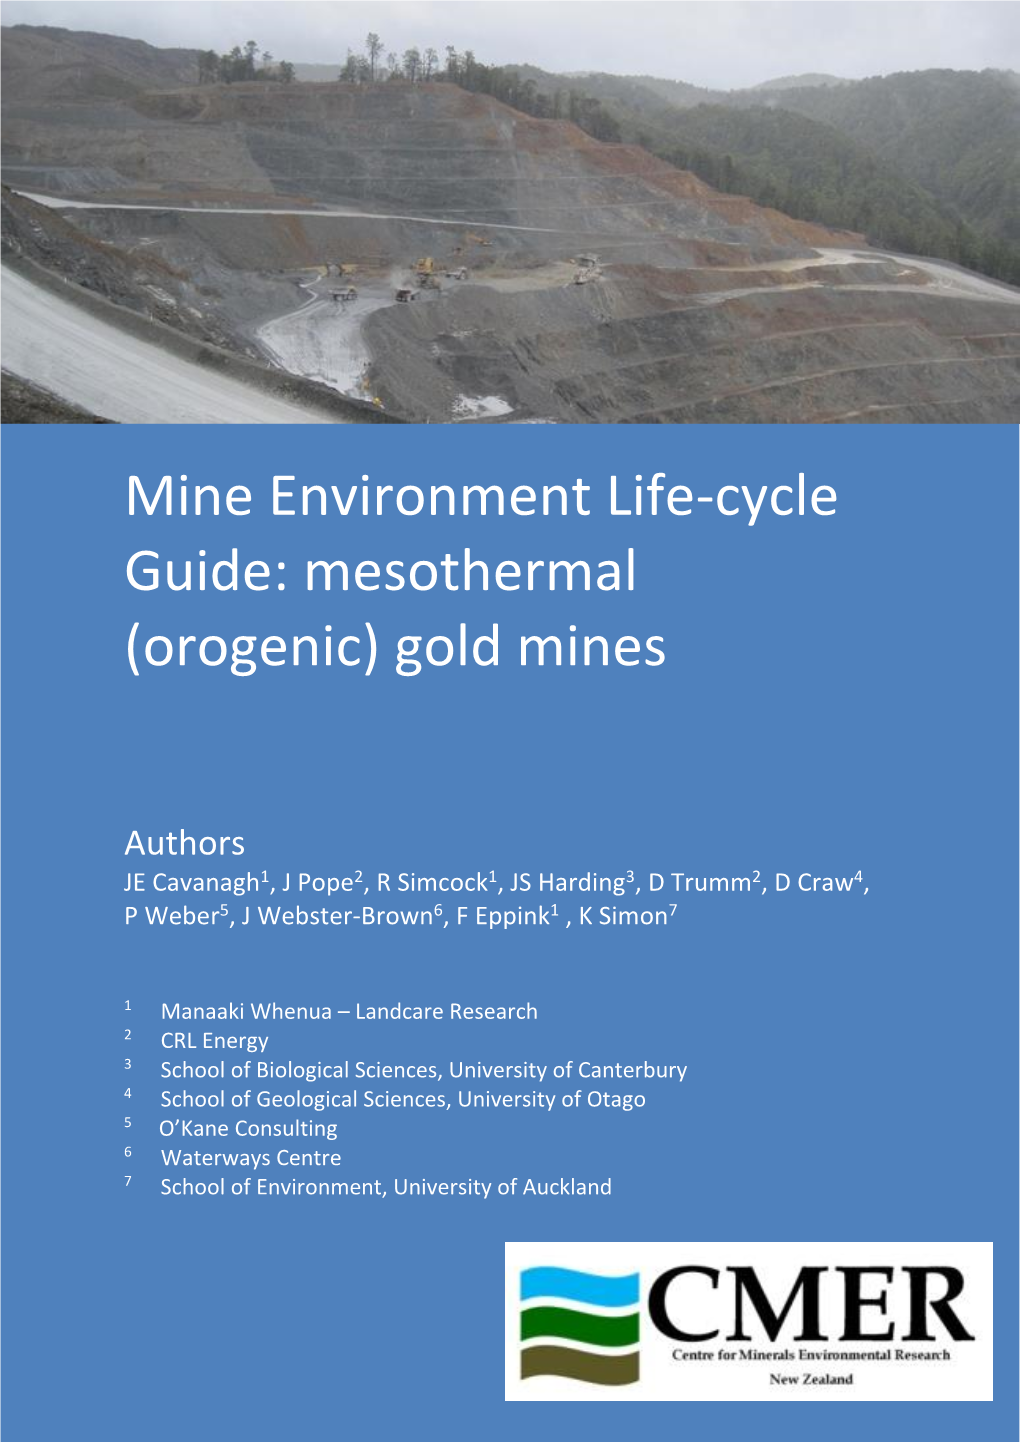 Mine Environment Life-Cycle Guide: Mesothermal (Orogenic) Gold Mines